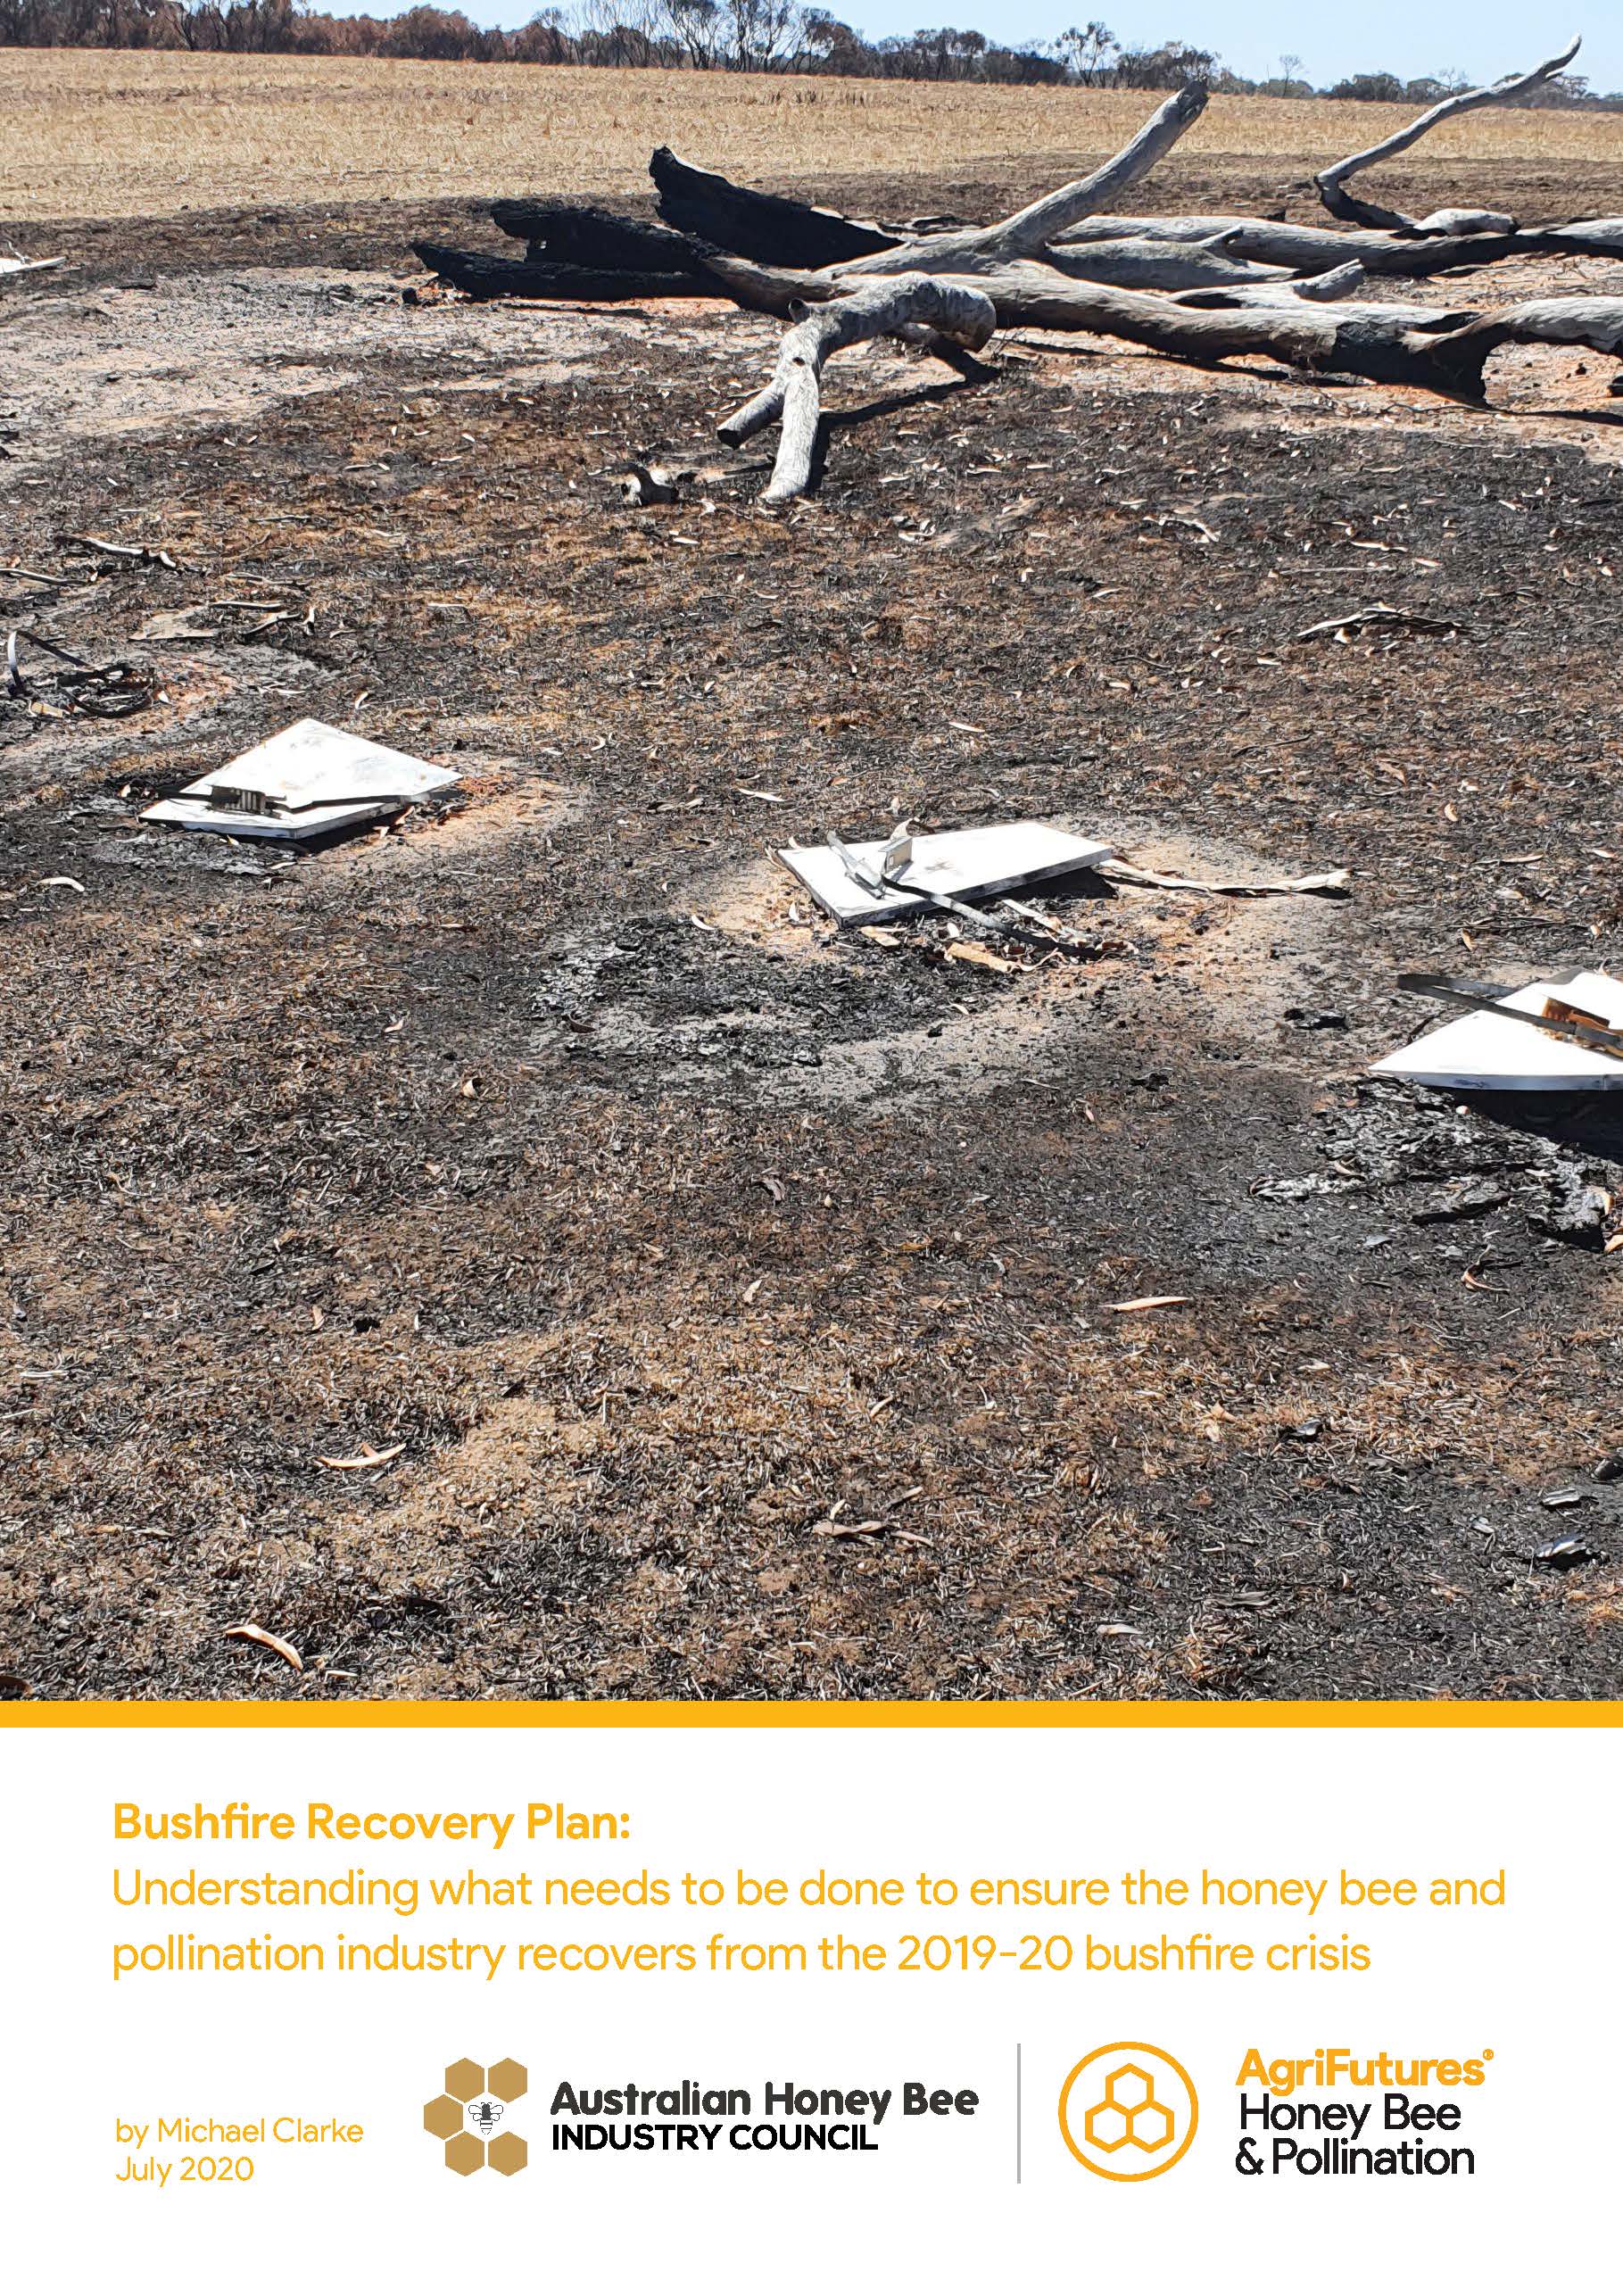 Bushfire Recovery Plan: Understanding what needs to be done to ensure the honey bee and pollination industry recovers from the 2019-20 bushfire crisis - image